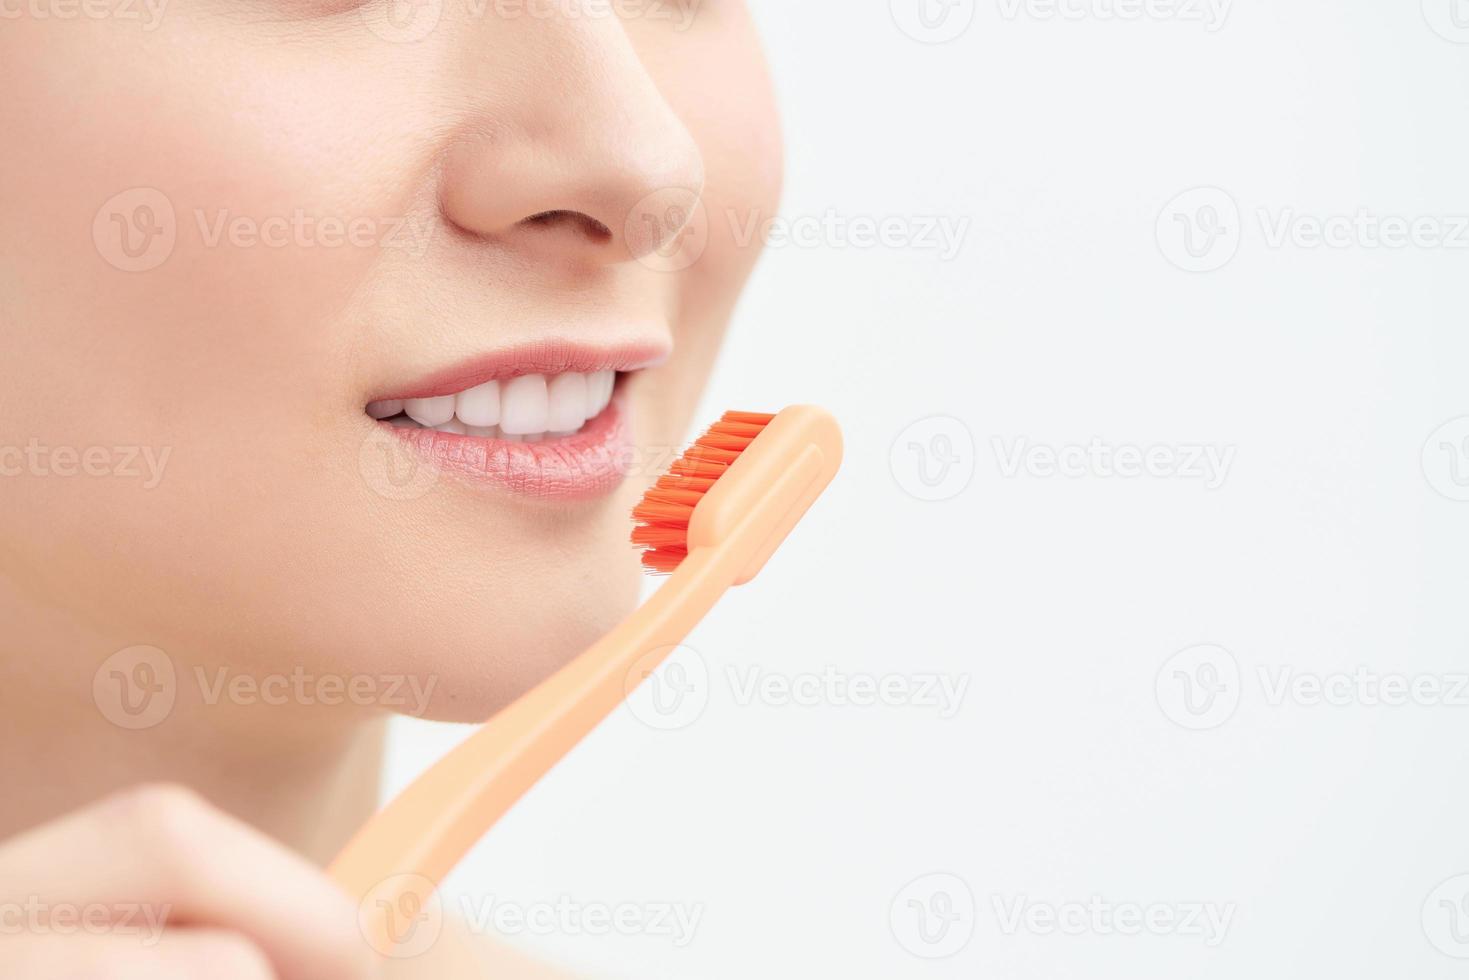 Dentist and orthodontist concept. Young woman cleaning and brushing teeth using toothbrush photo